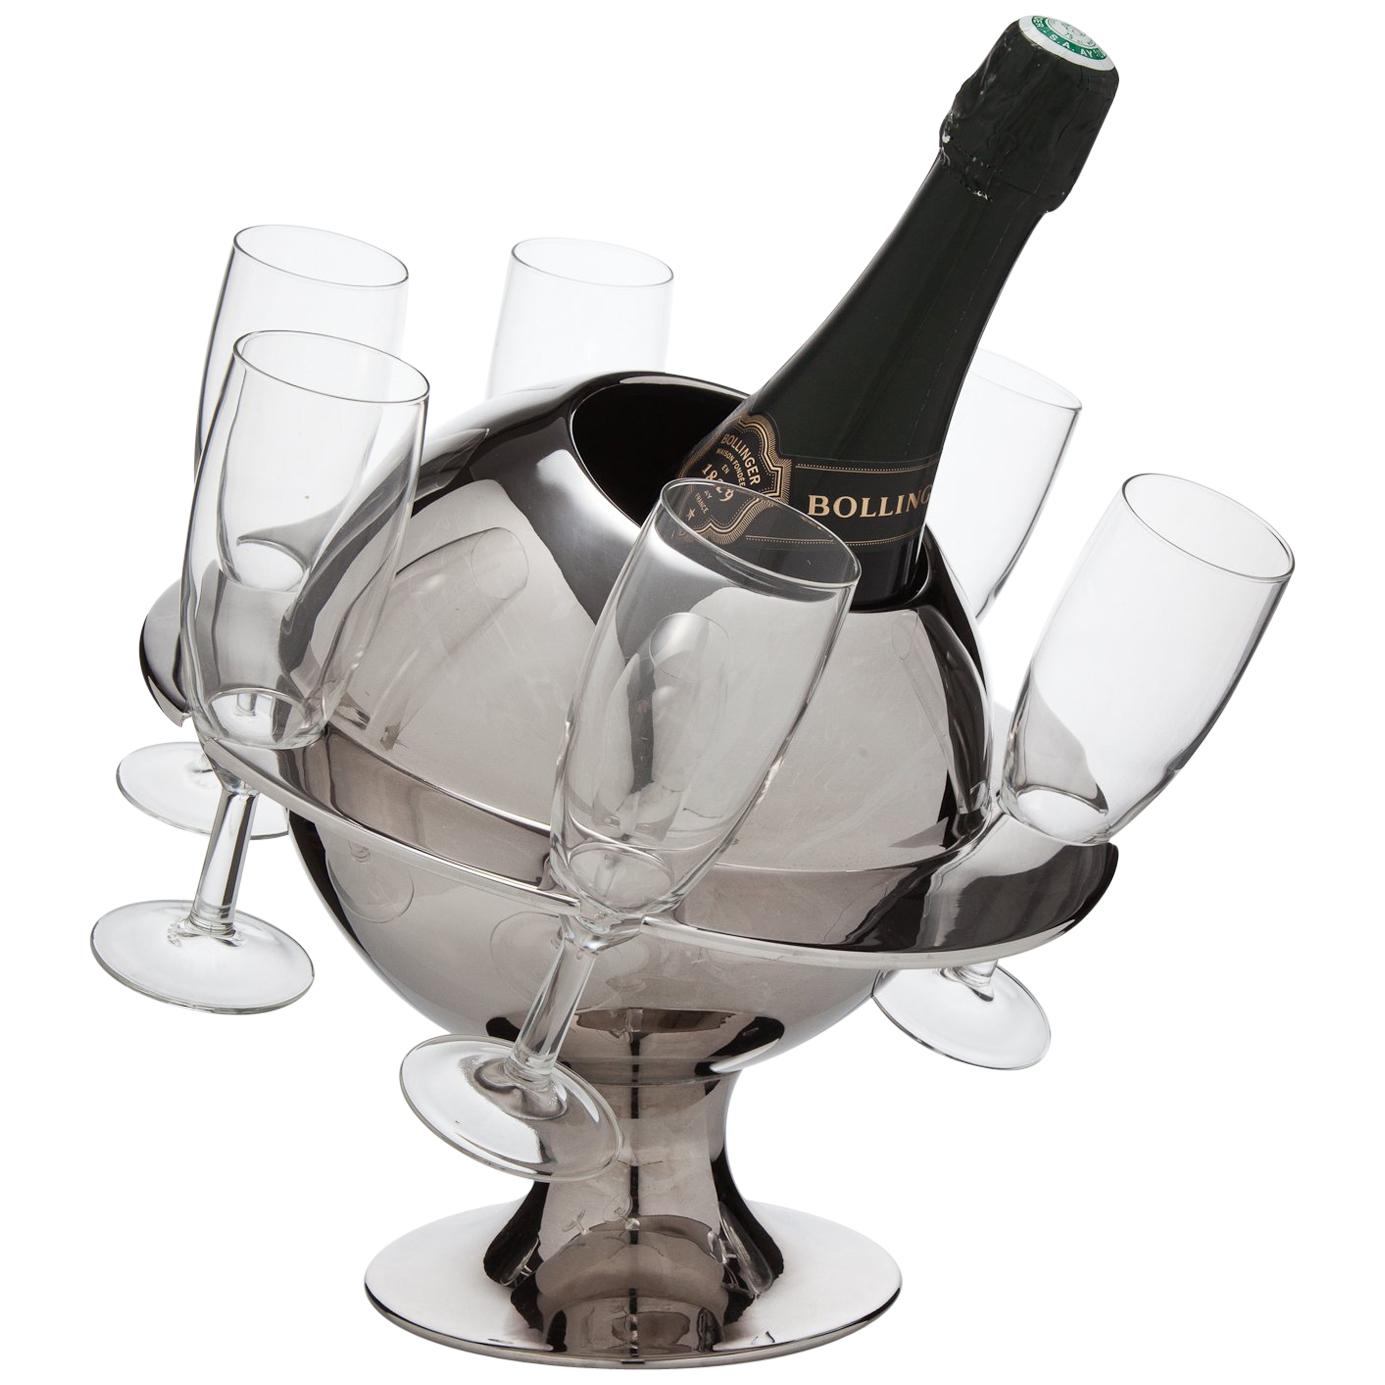 Novelty French Modernist Chrome Planet Champagne Cooler, circa 1955